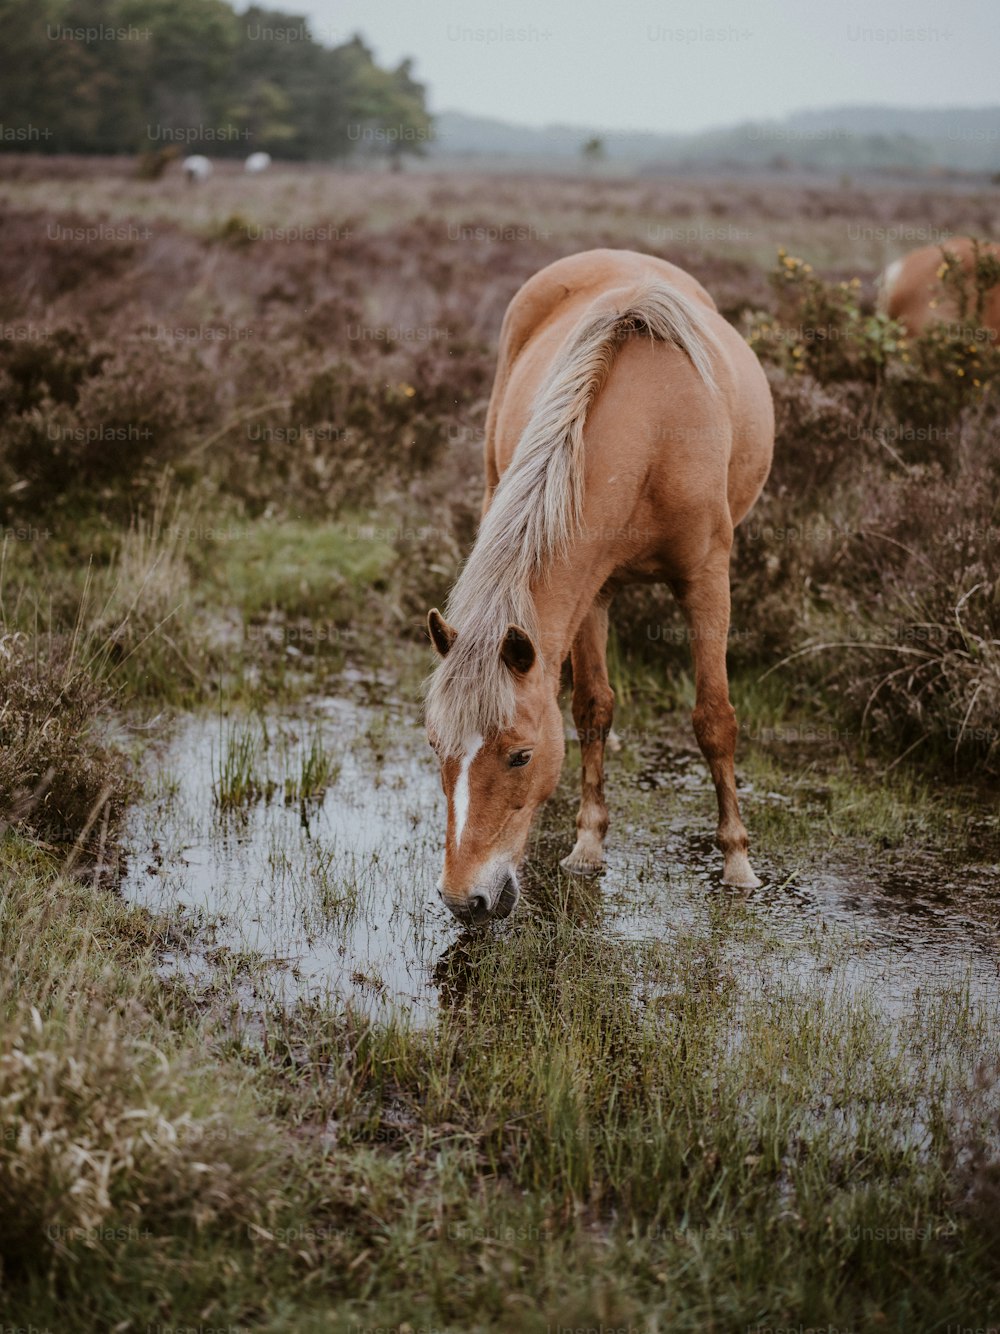 a horse drinking water from a puddle in a field